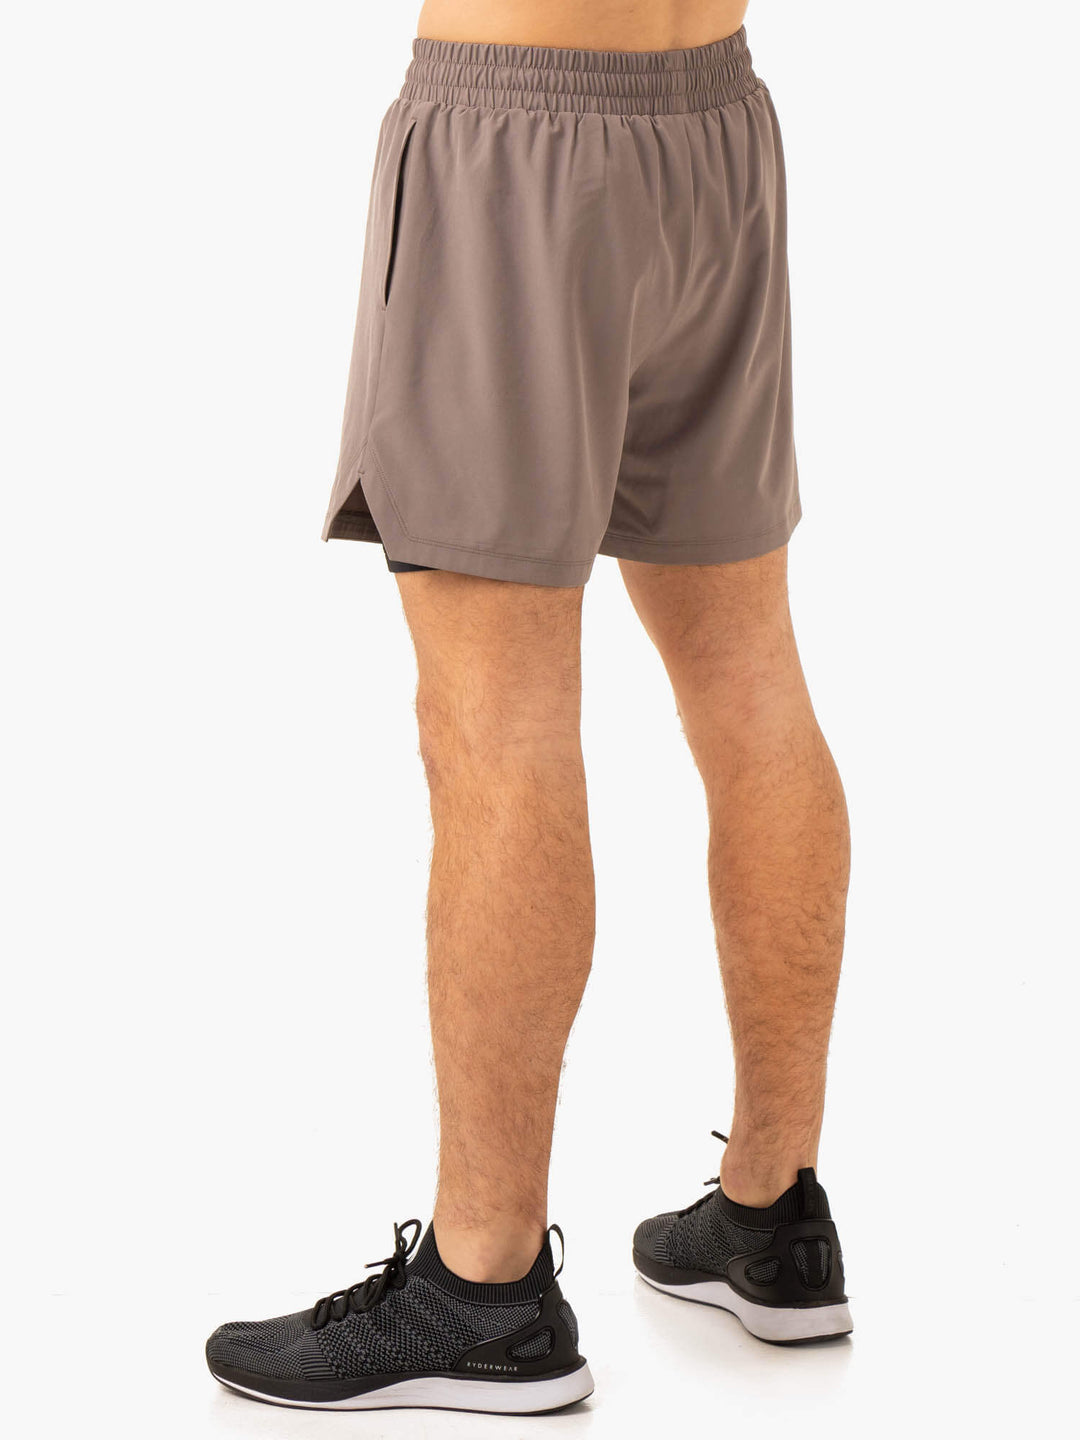 Pursuit 2 In 1 Training Shorts - Taupe Clothing Ryderwear 